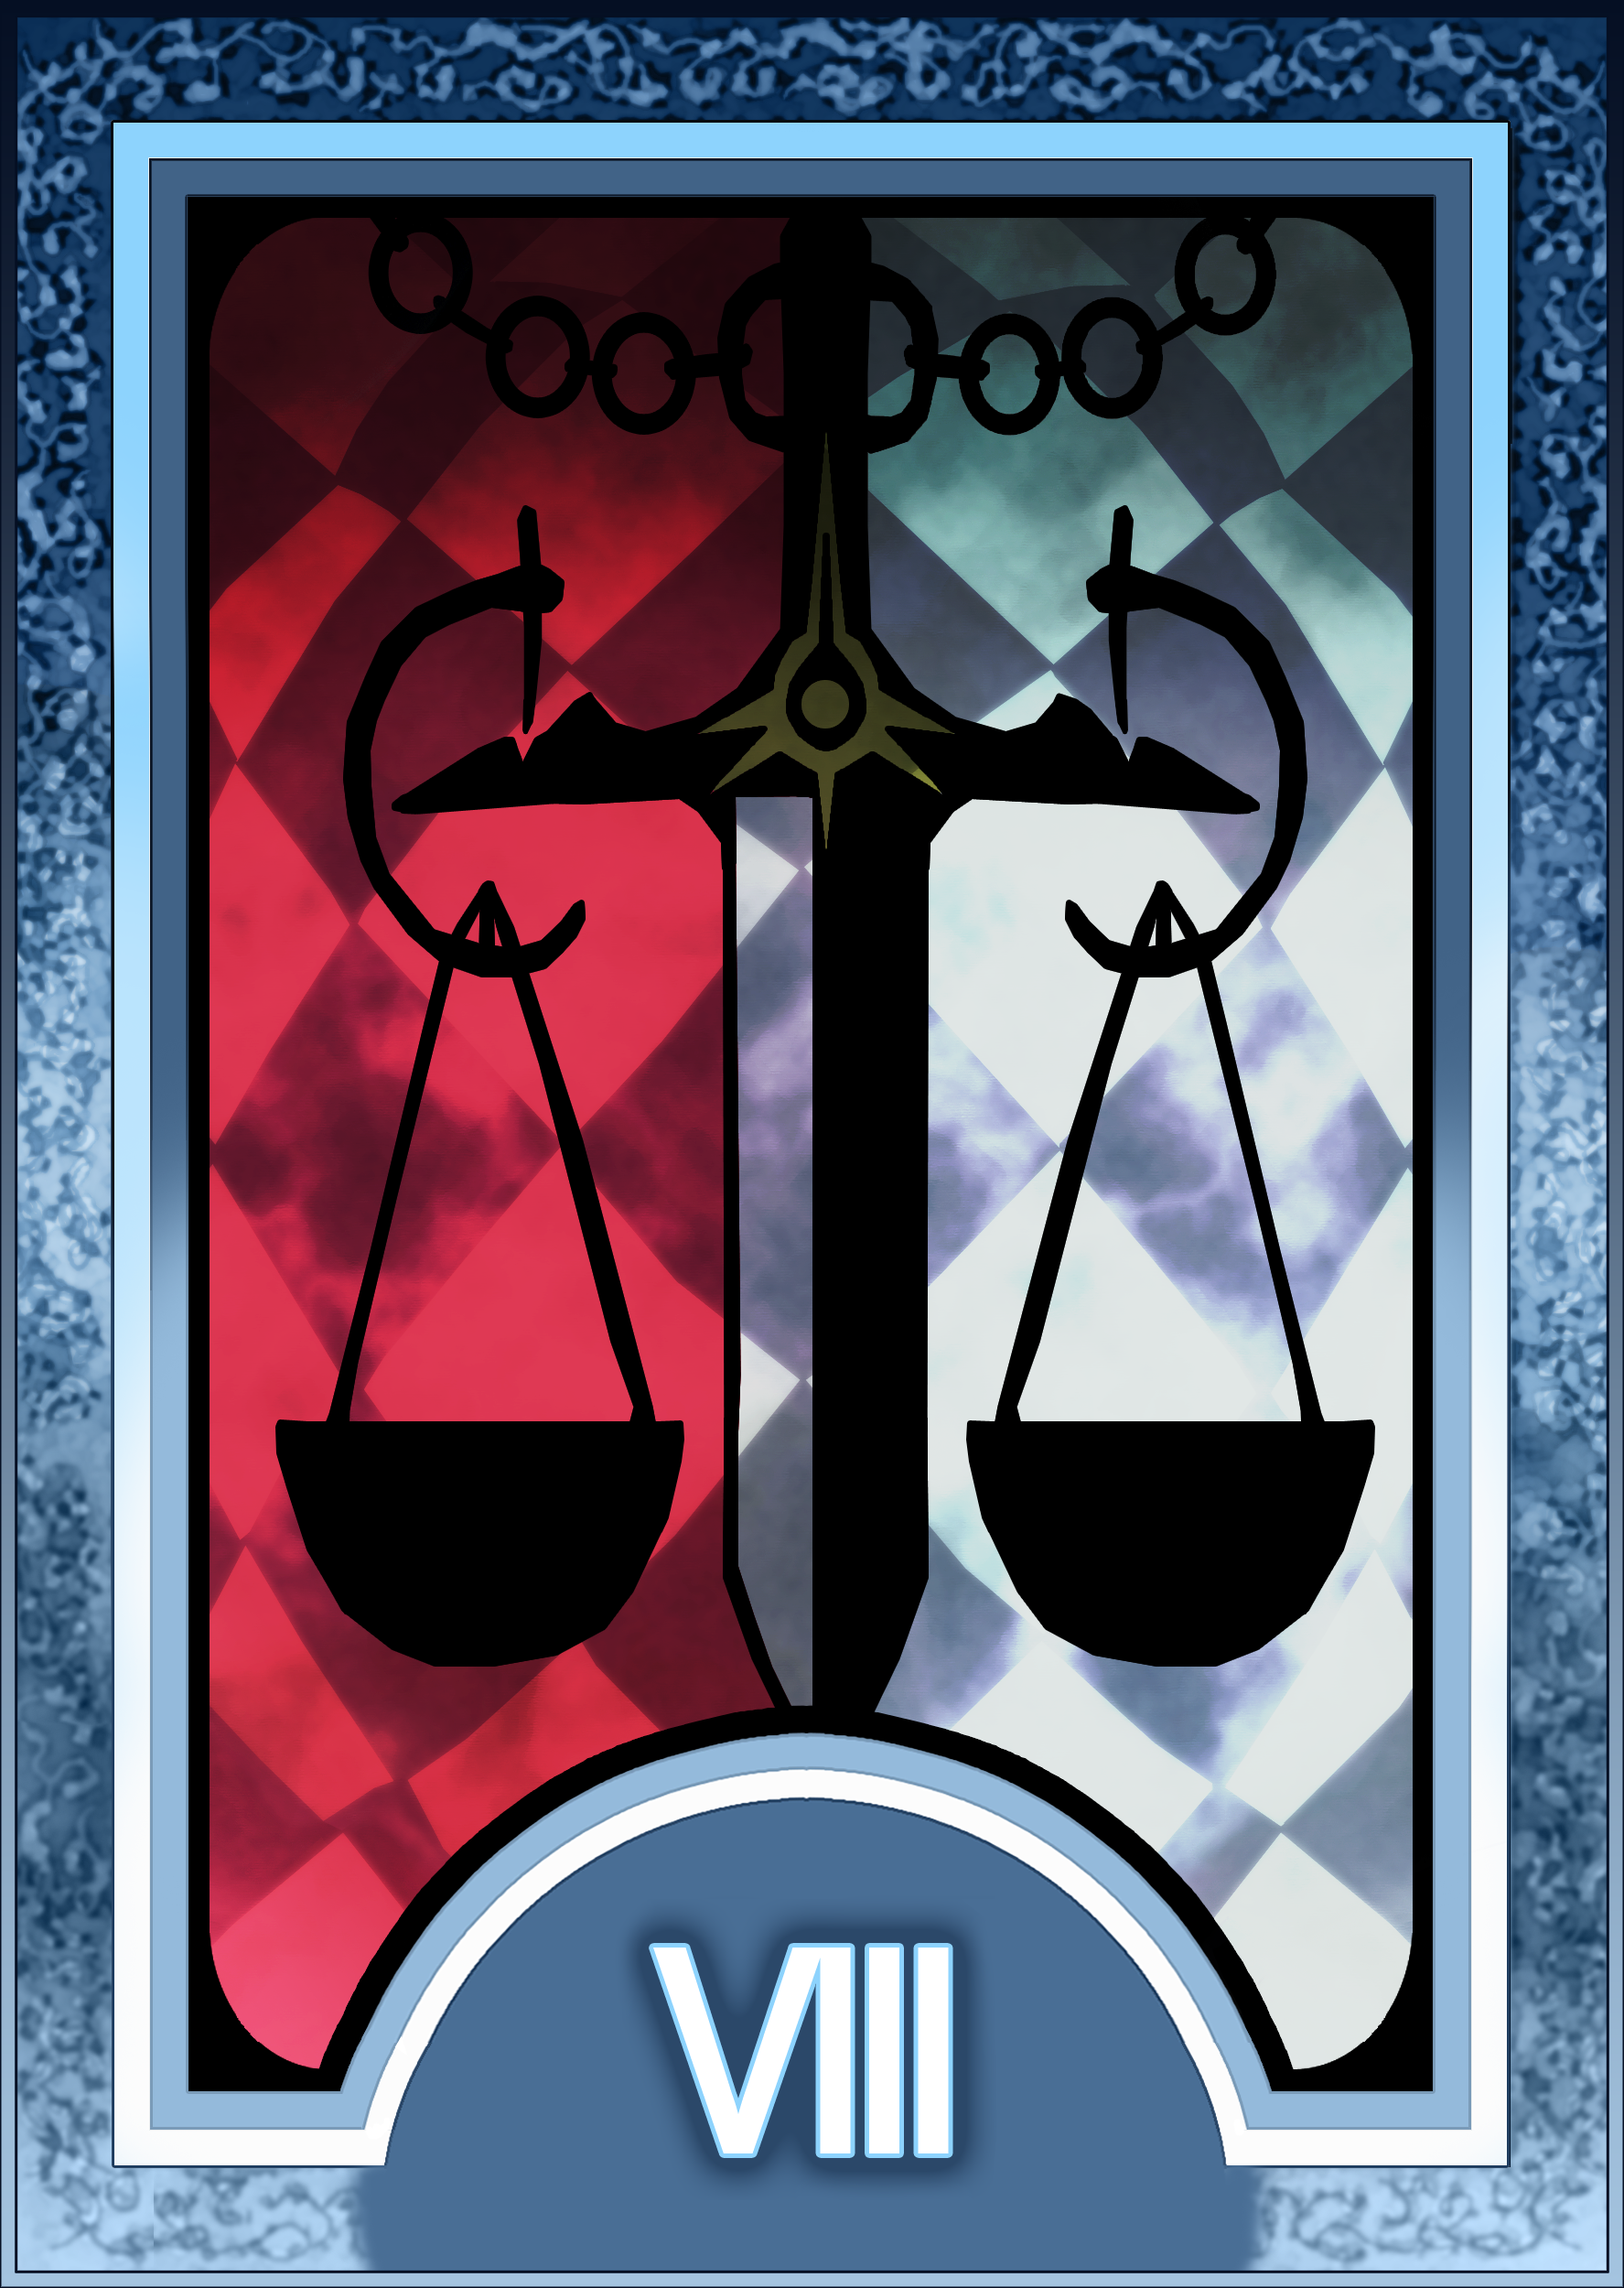 A Journal of Brief Reprieves - Cecil Erinforth's Social Links Persona_3_4_tarot_card_deck_hr___justice_arcana_by_enetirnel-d6xr783